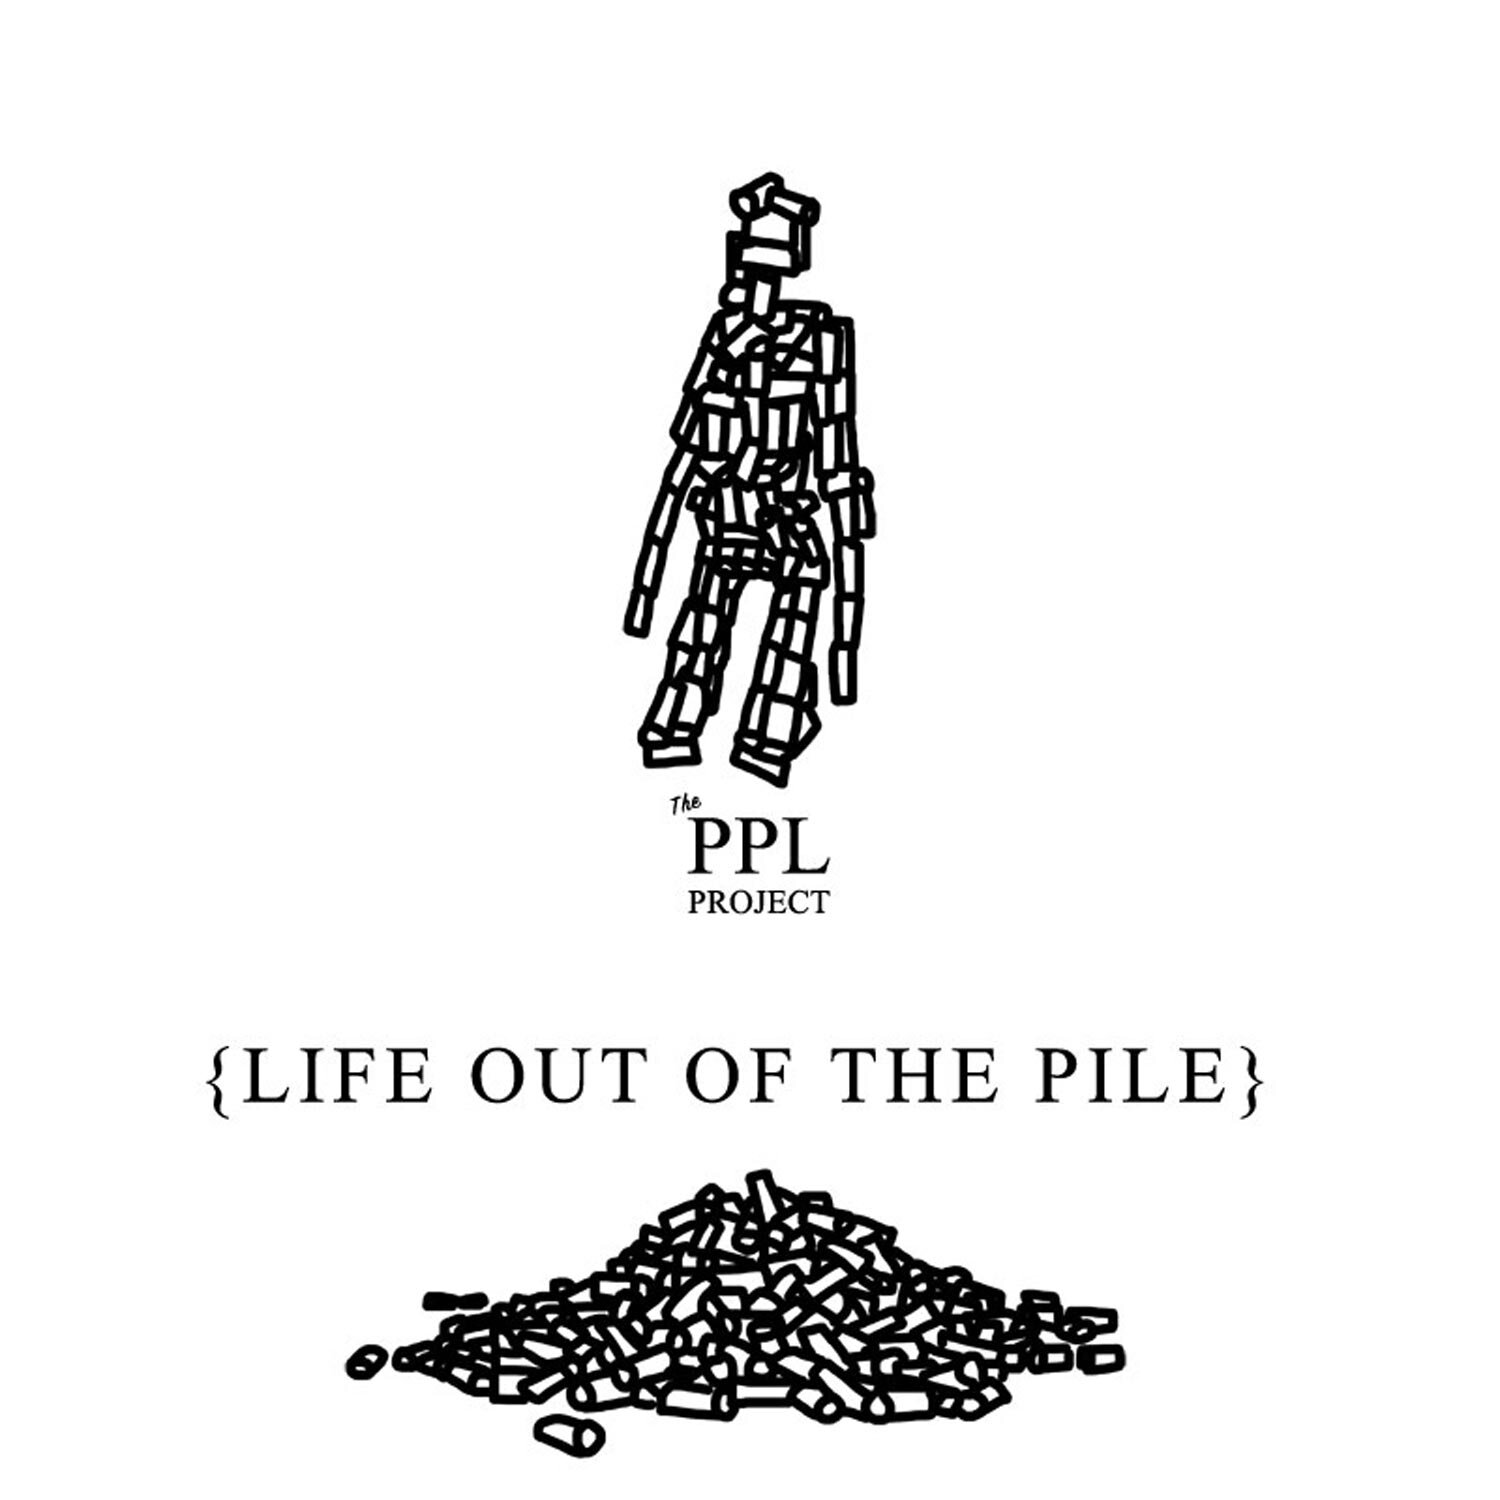 Life out of the pile!